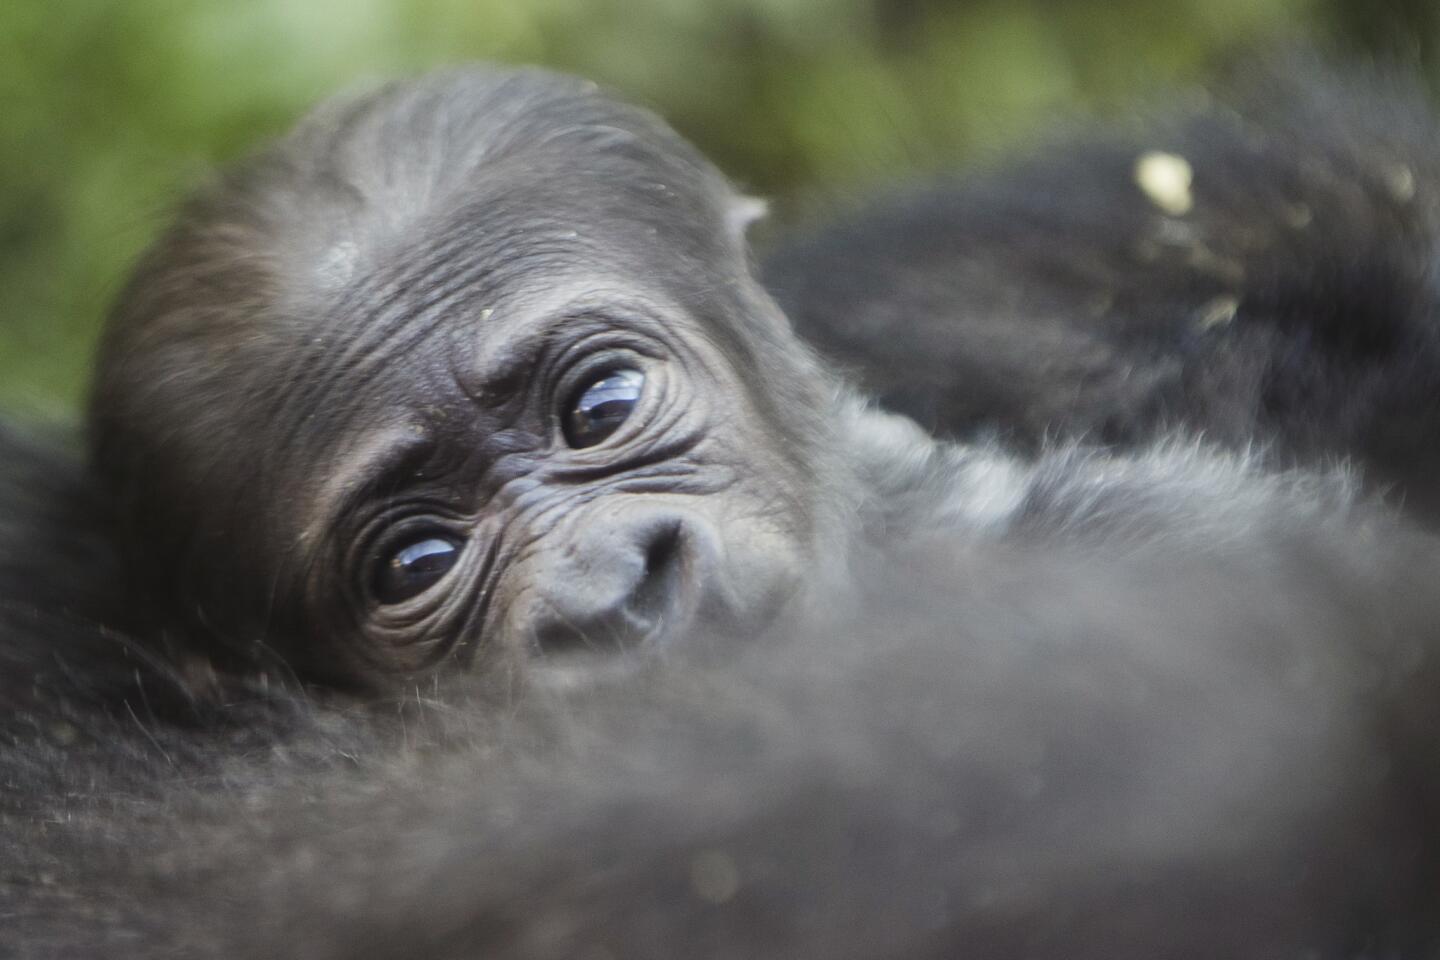 A newborn baby western lowland gorilla looks up as it is held by its mother Honi during its debut at the Philadelphia Zoo in Philadelphia on Aug. 31, 2016. The unnamed baby gorilla was born Aug. 26.